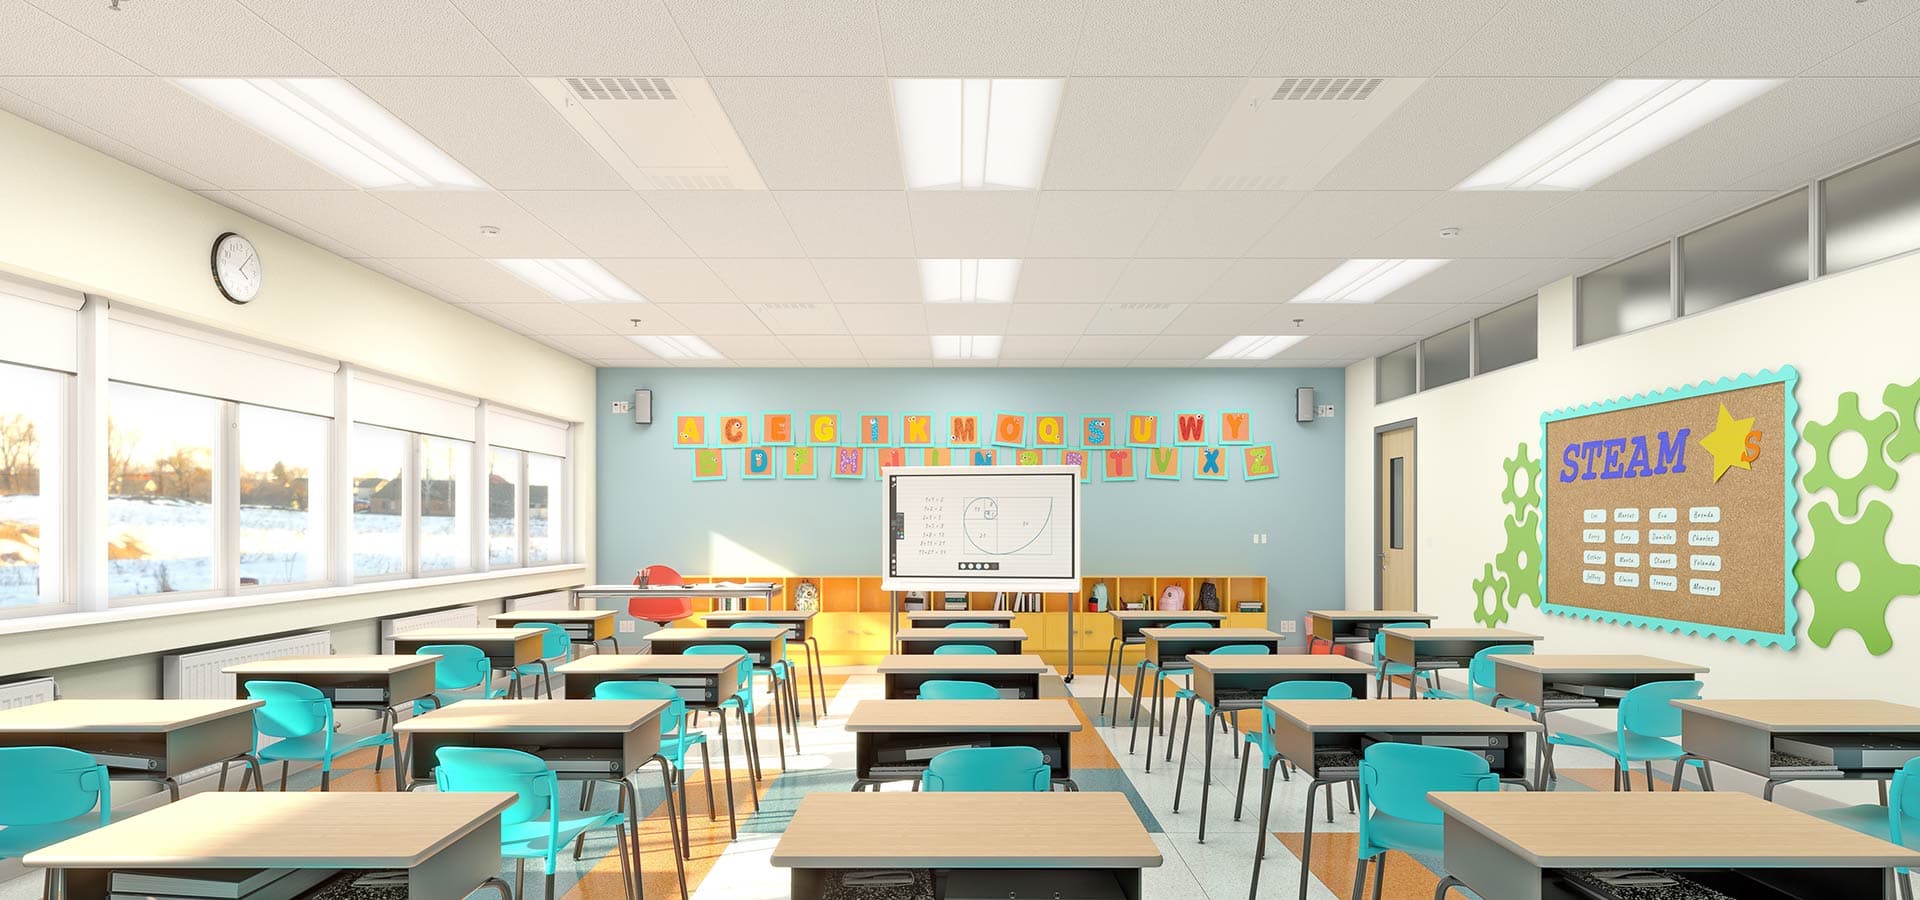 ceiling panels in a classroom using a controlled air disinfection solution.